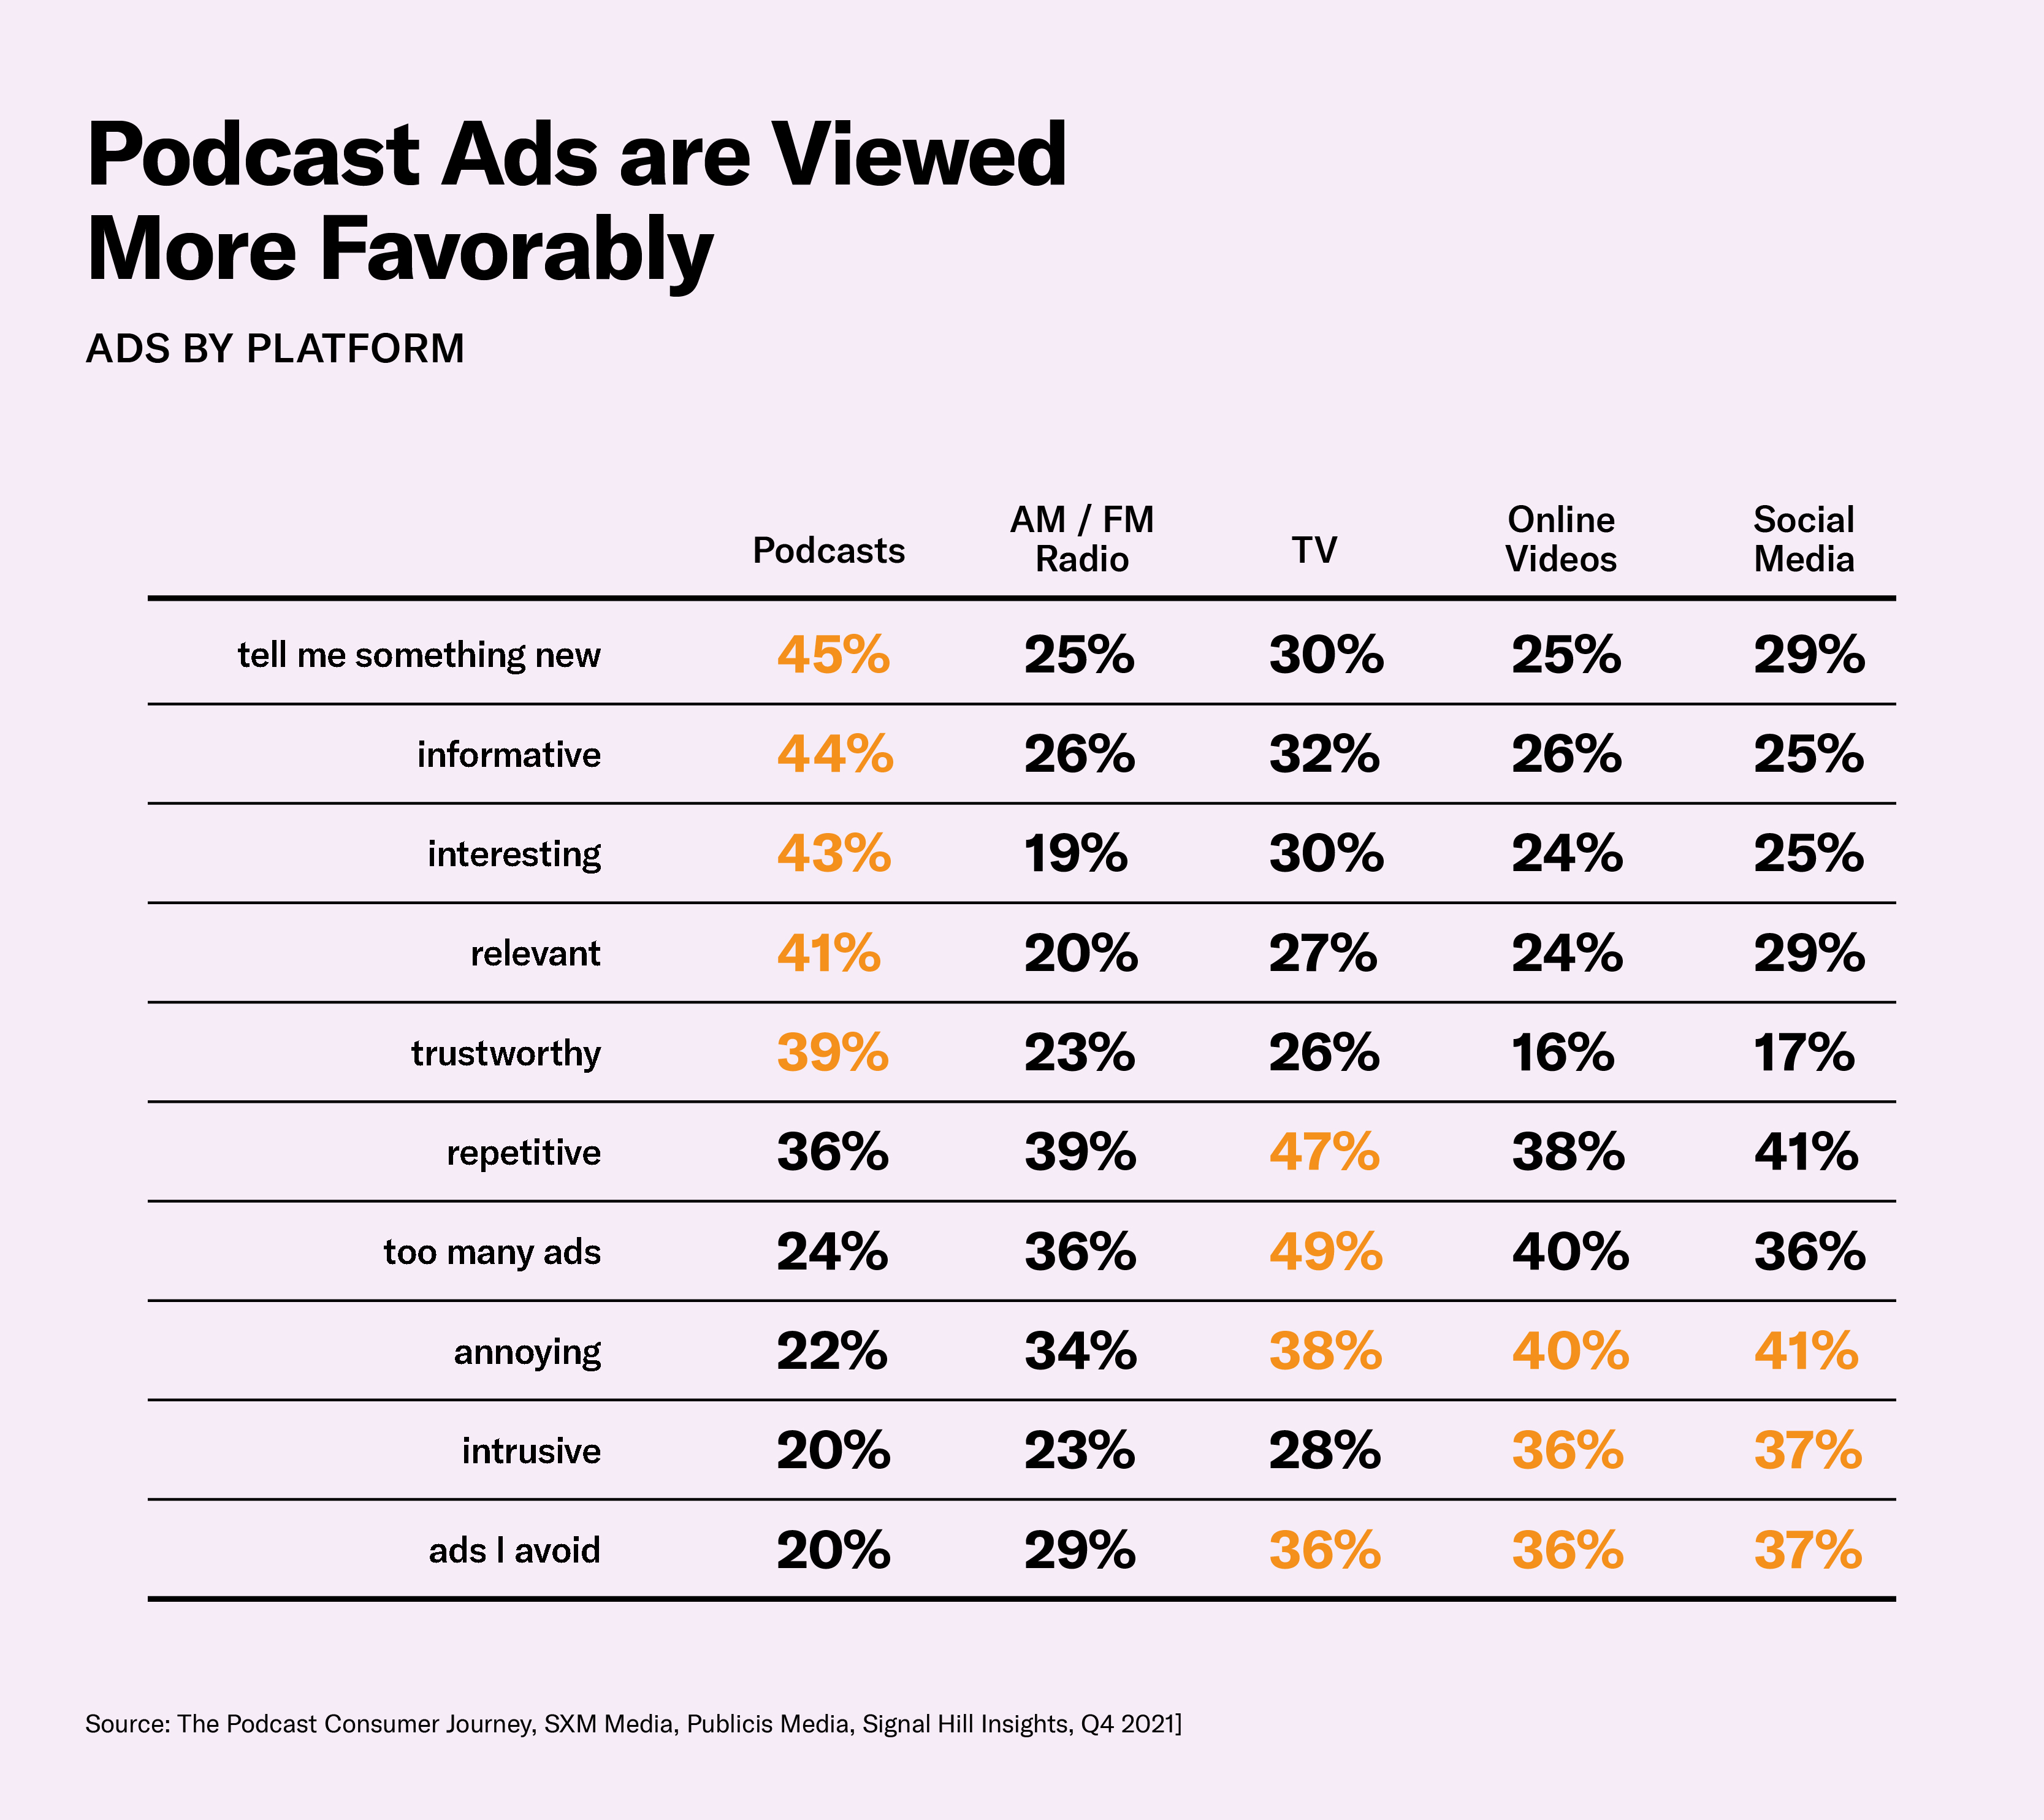 Podcast ads are viewed more favorably